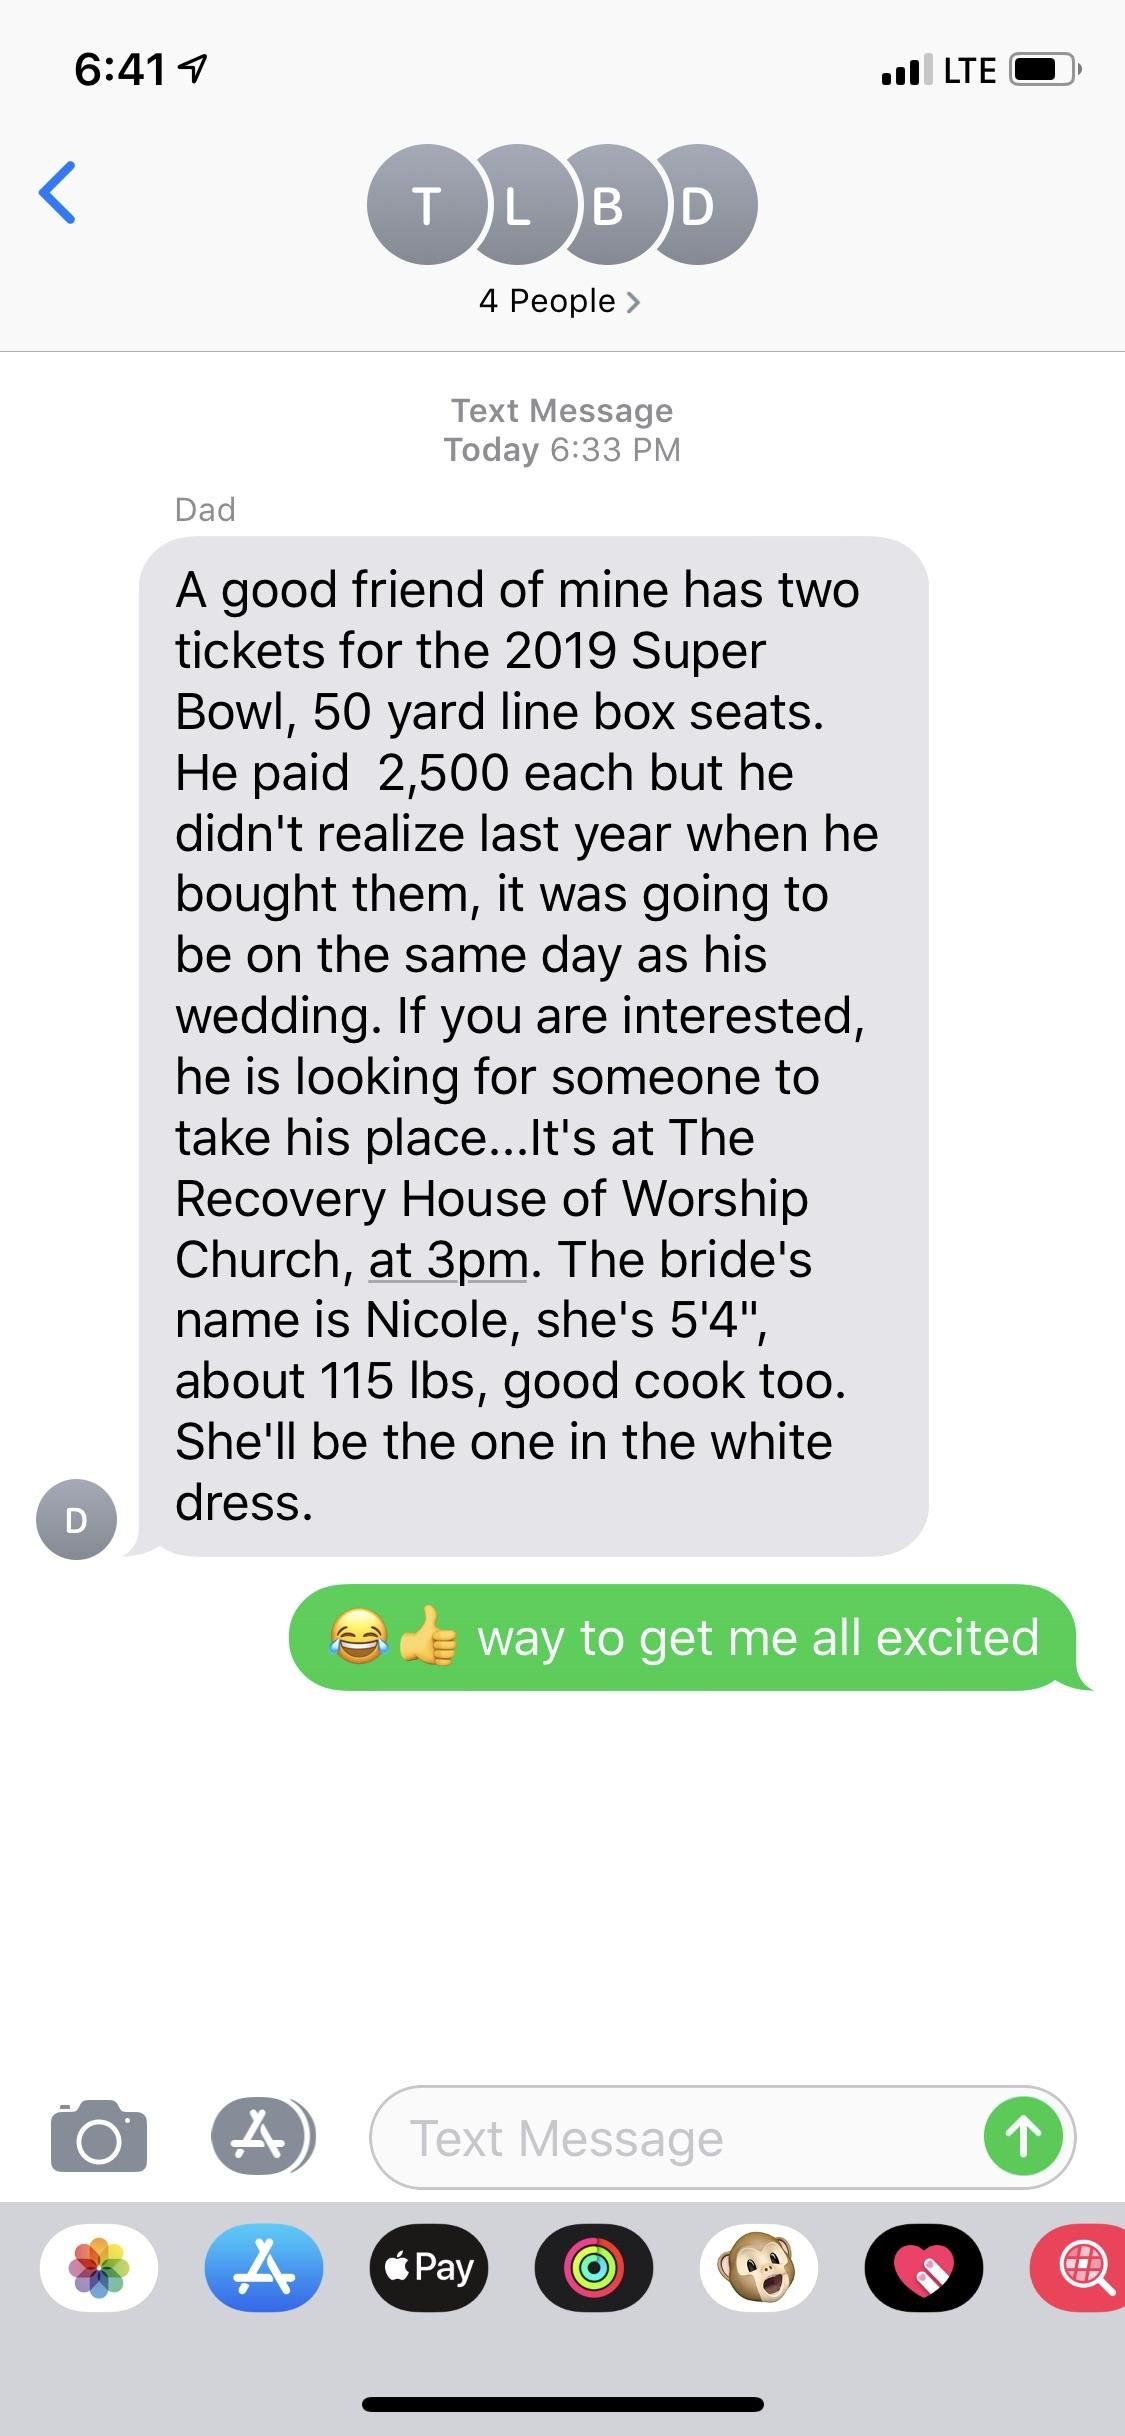 Found out today after 24 years my dad has a sense of humor